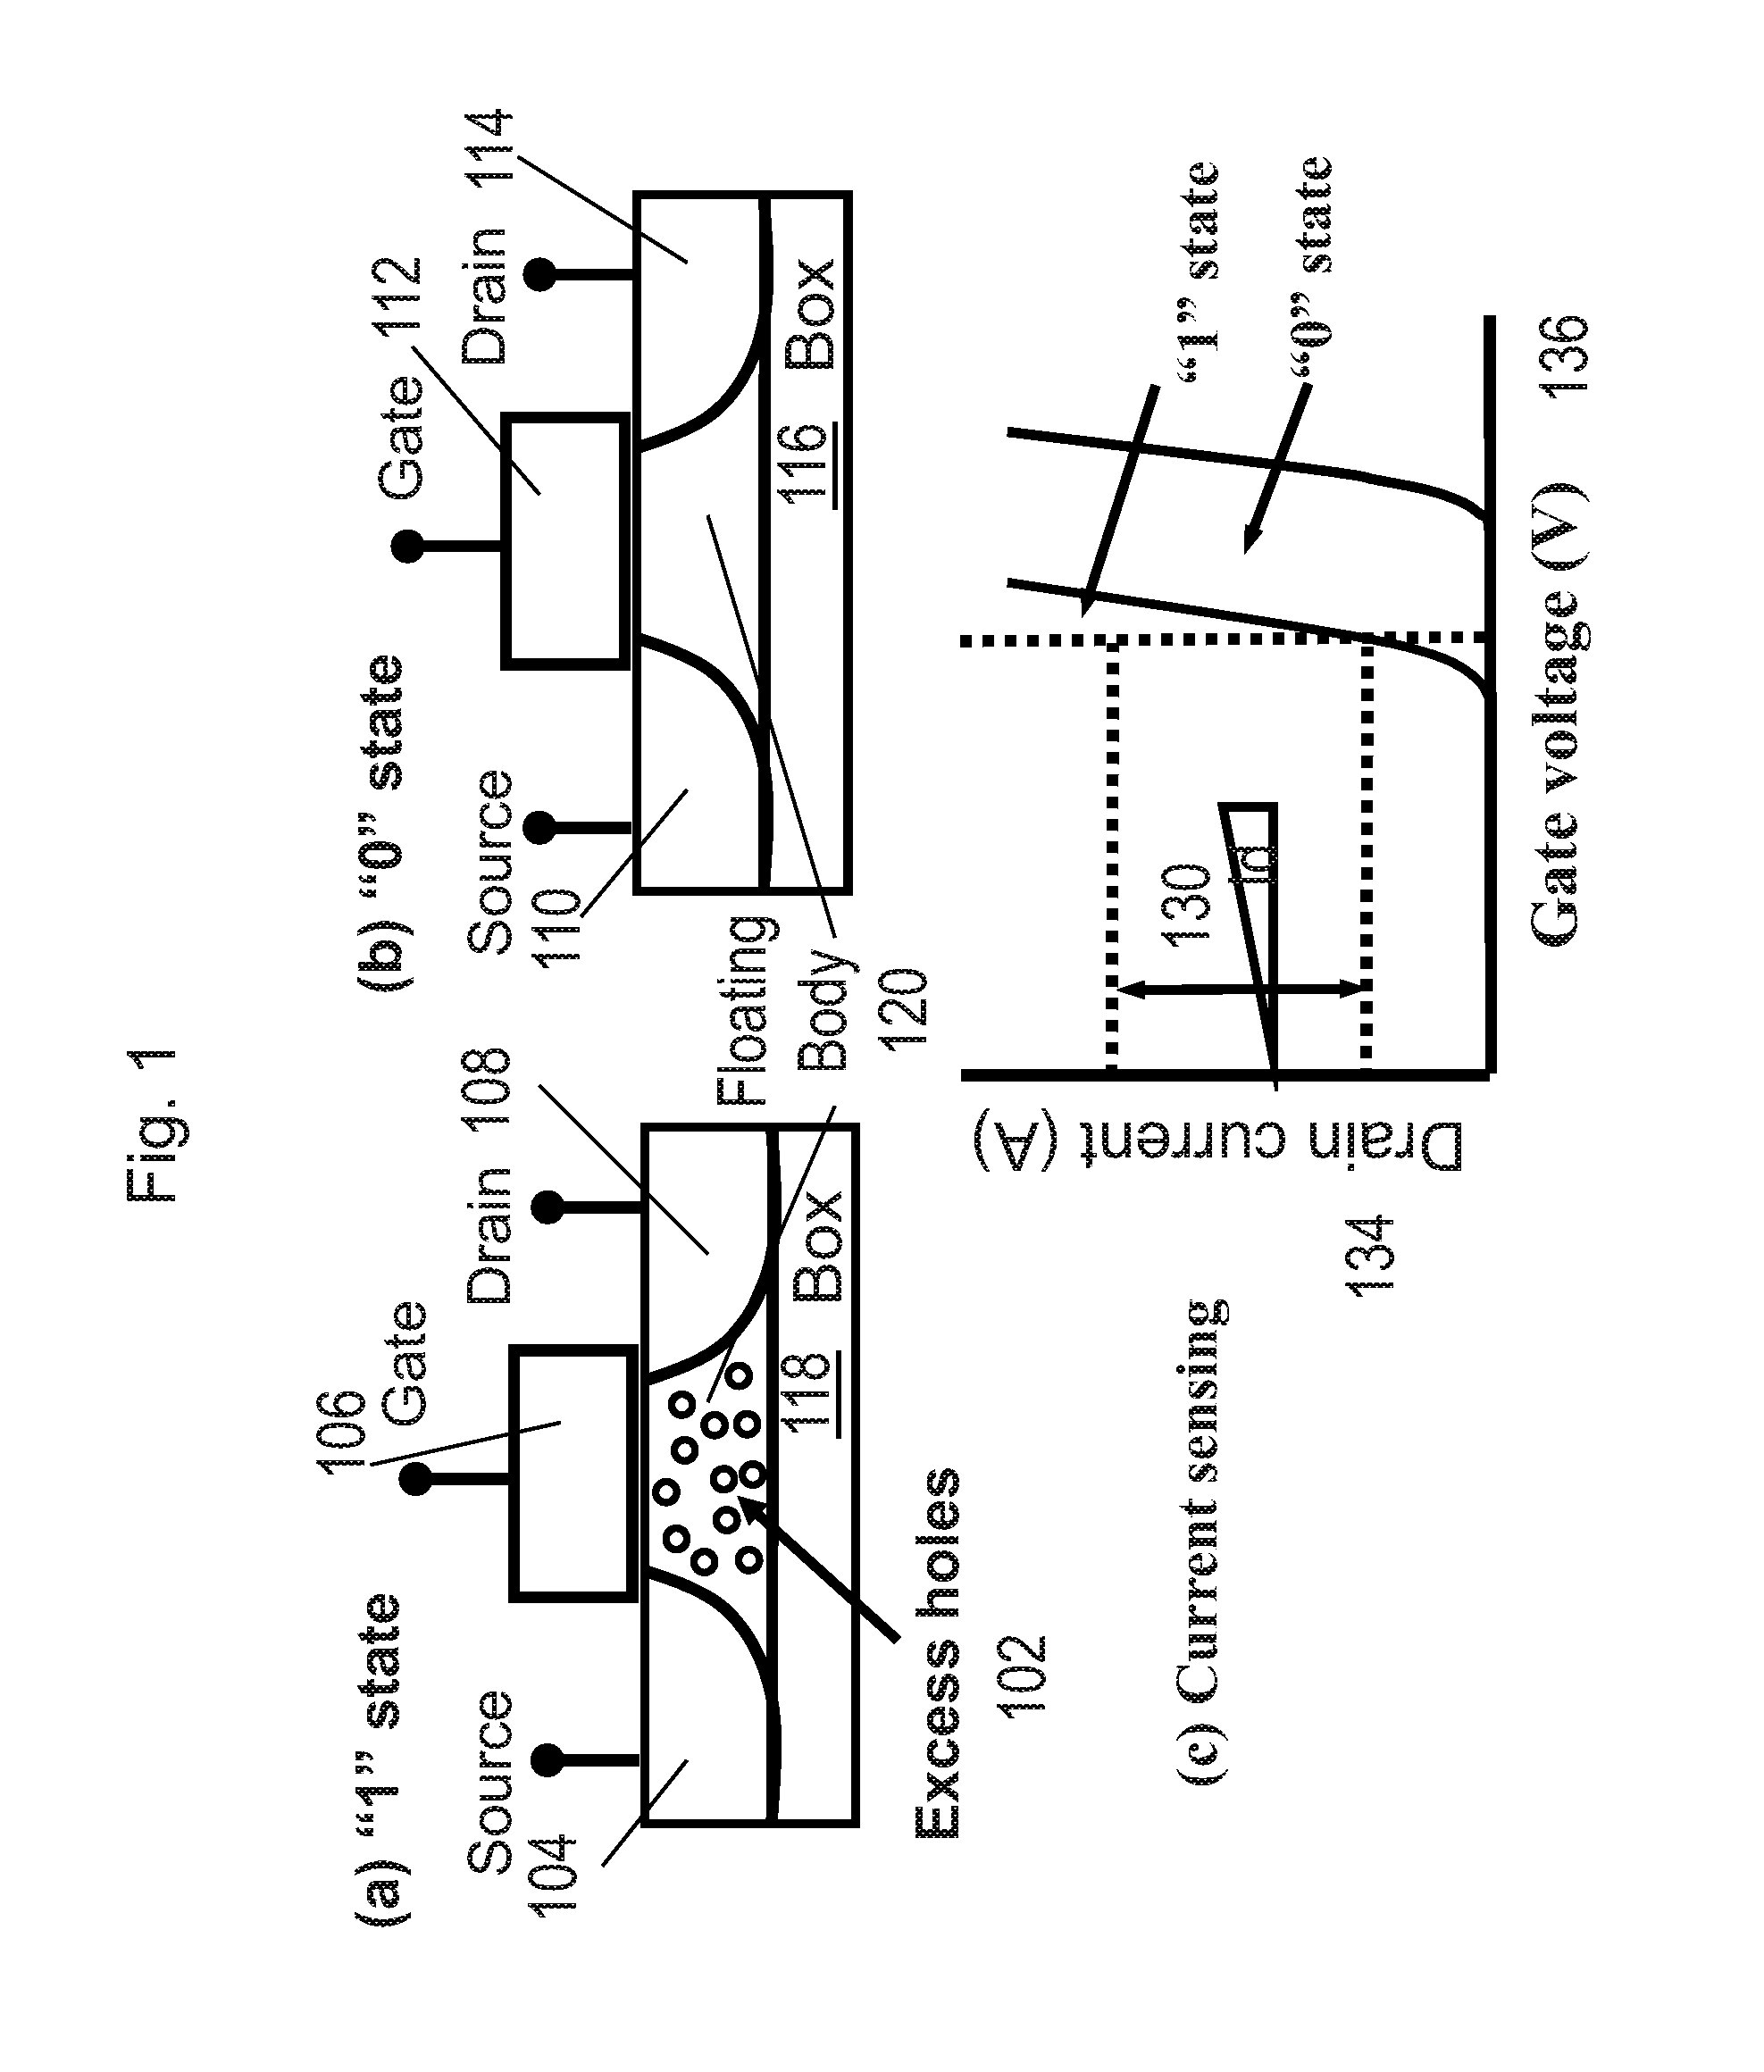 Method of maintaining a memory state